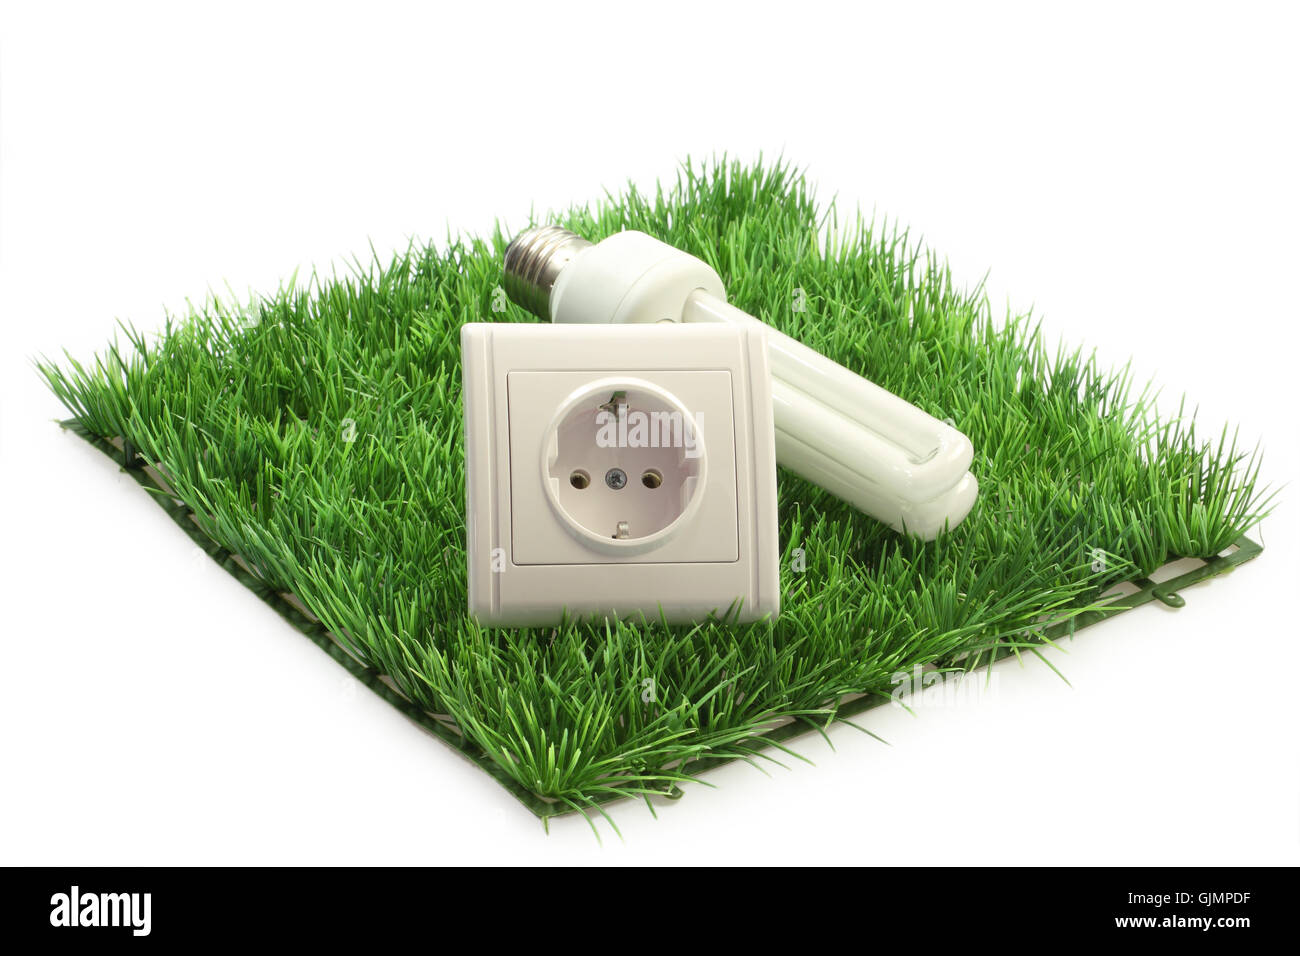 outlet socket energy supply Stock Photo